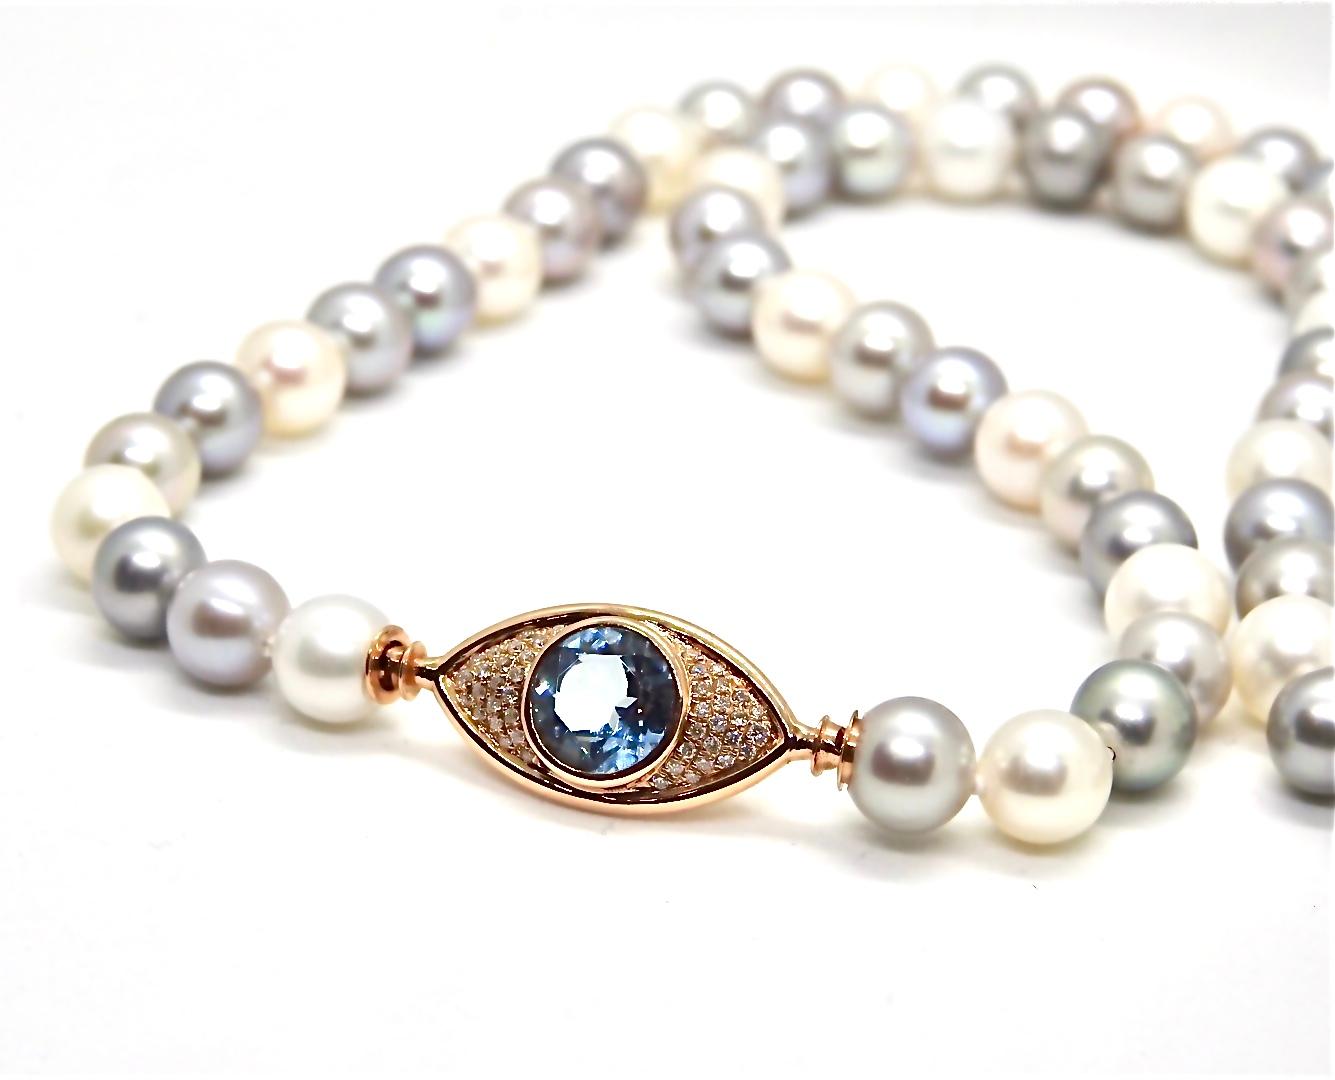 Round Cut Pearls Necklace with 18 Karat Gold, Diamonds and Swiss Blue Topaz Eye Clasp For Sale